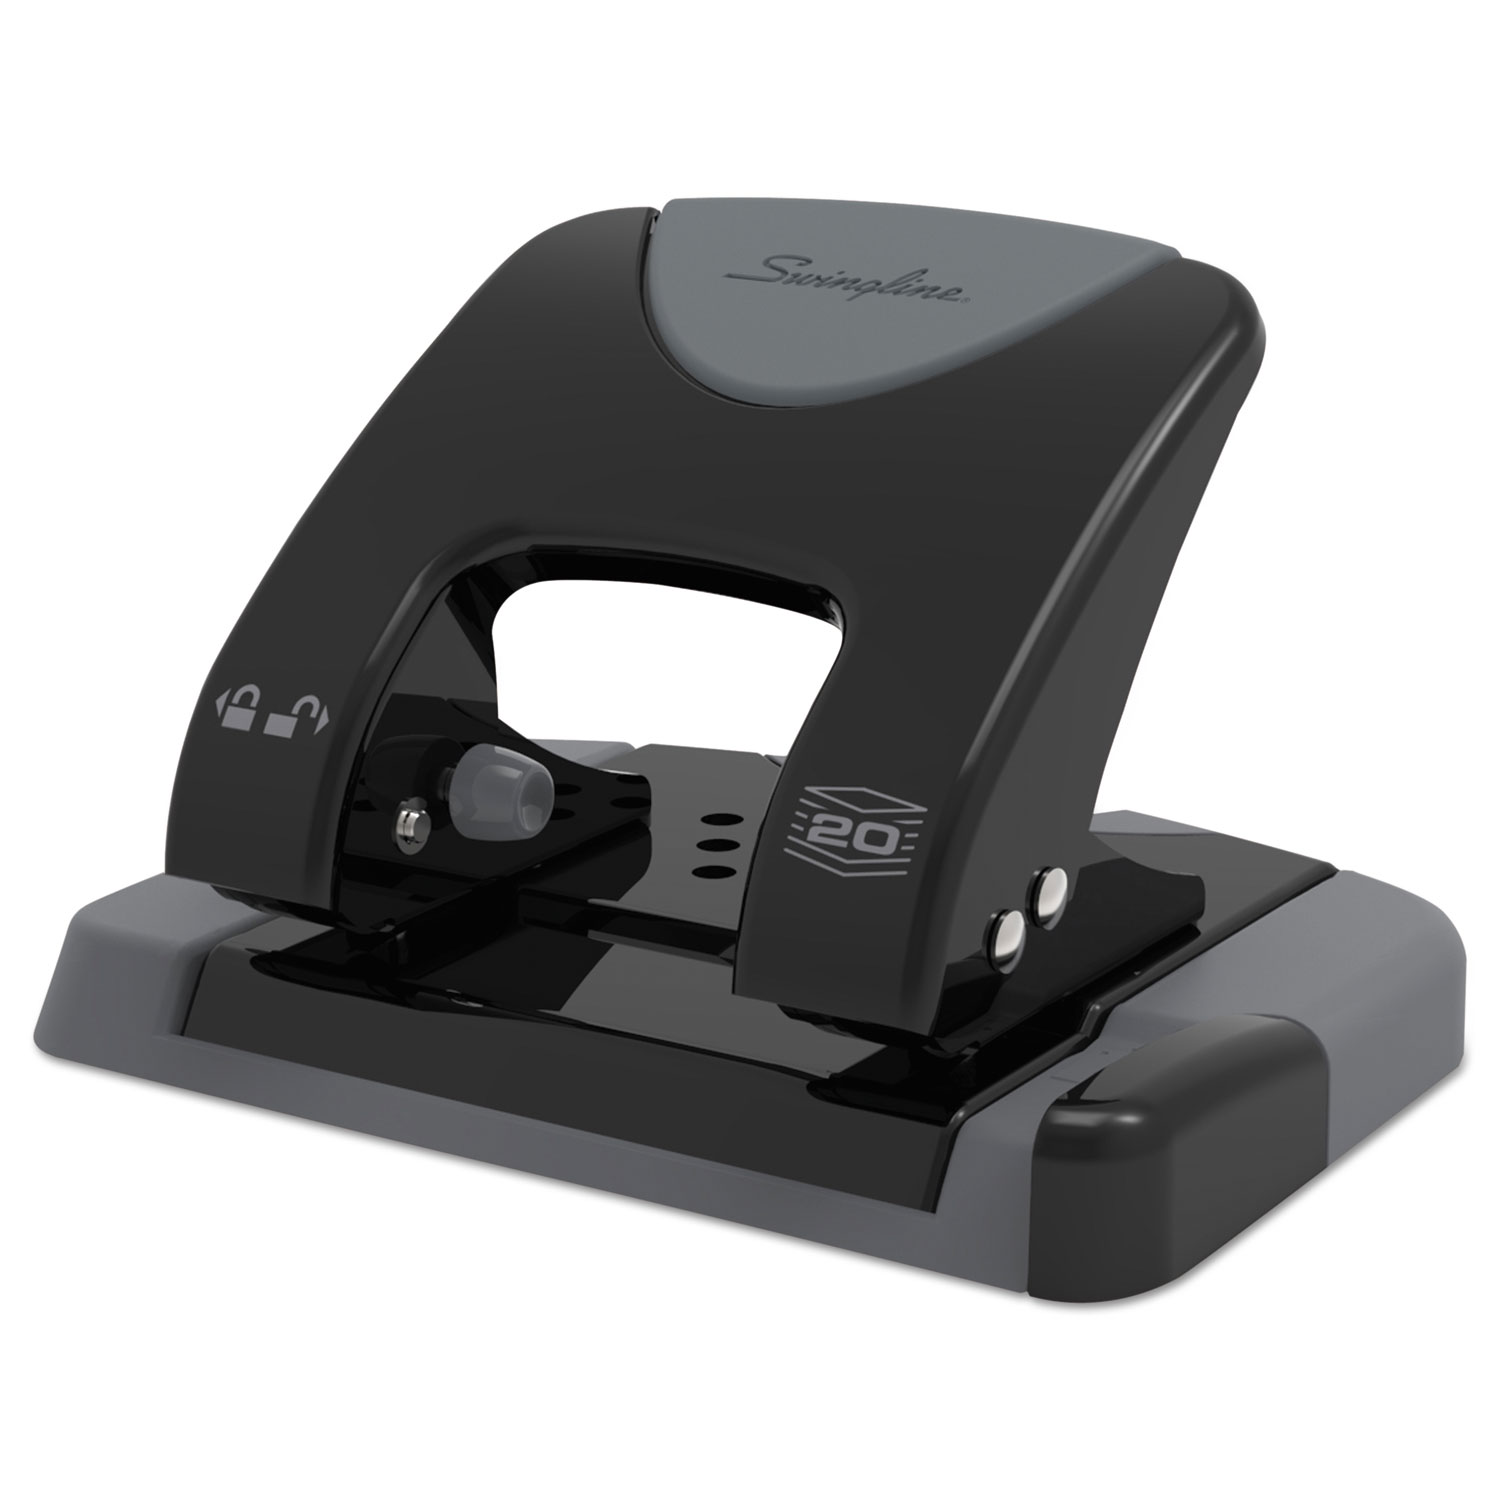 20-Sheet SmartTouch Two-Hole Punch, 9/32 Holes, Black/Gray